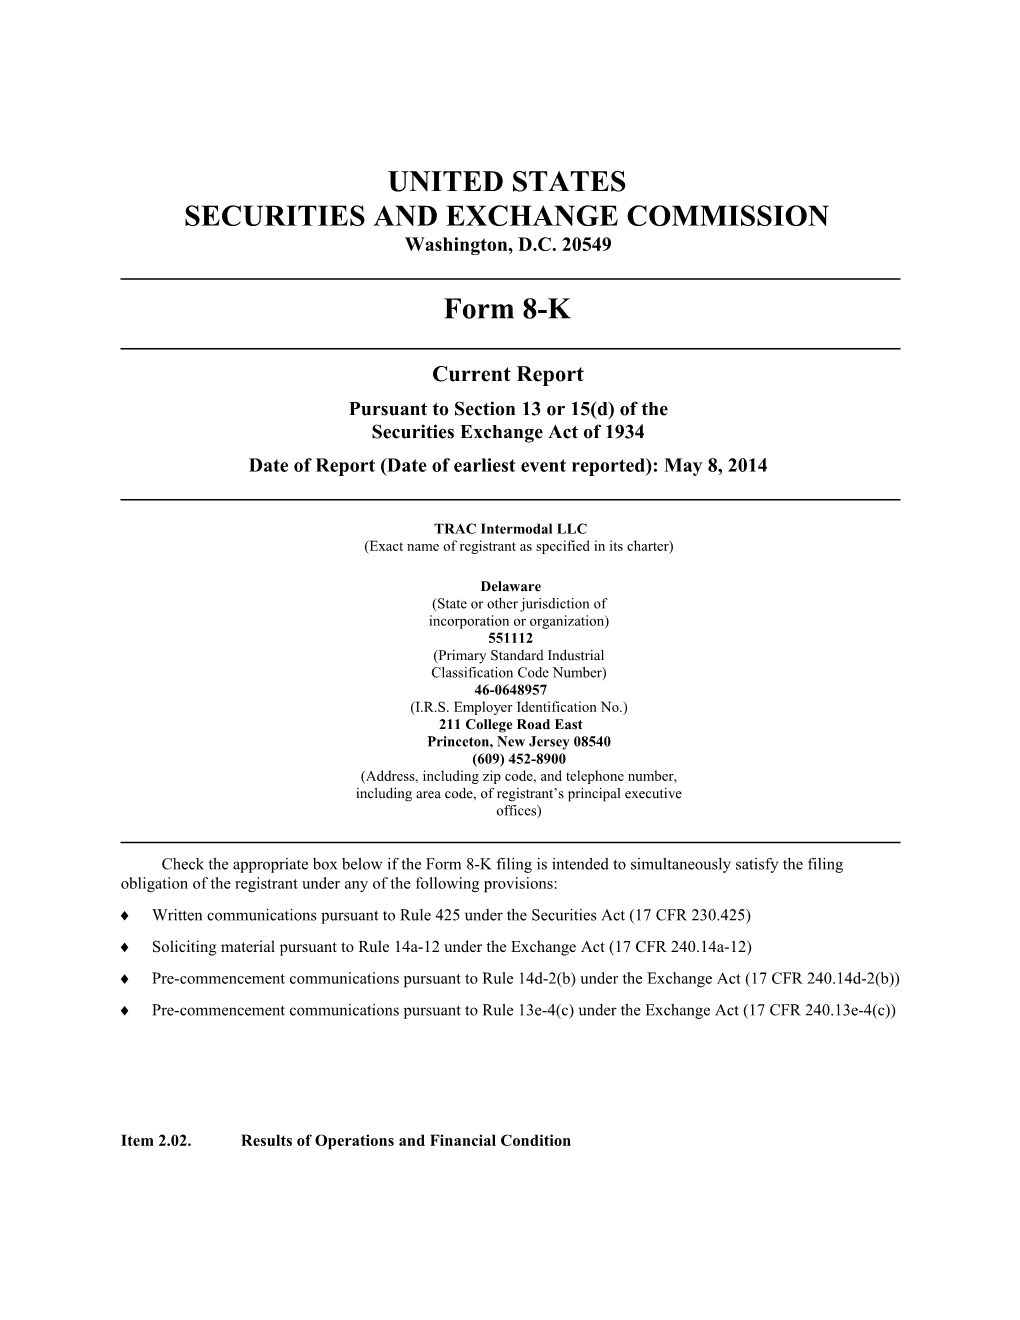 Securities and Exchange Commission s26